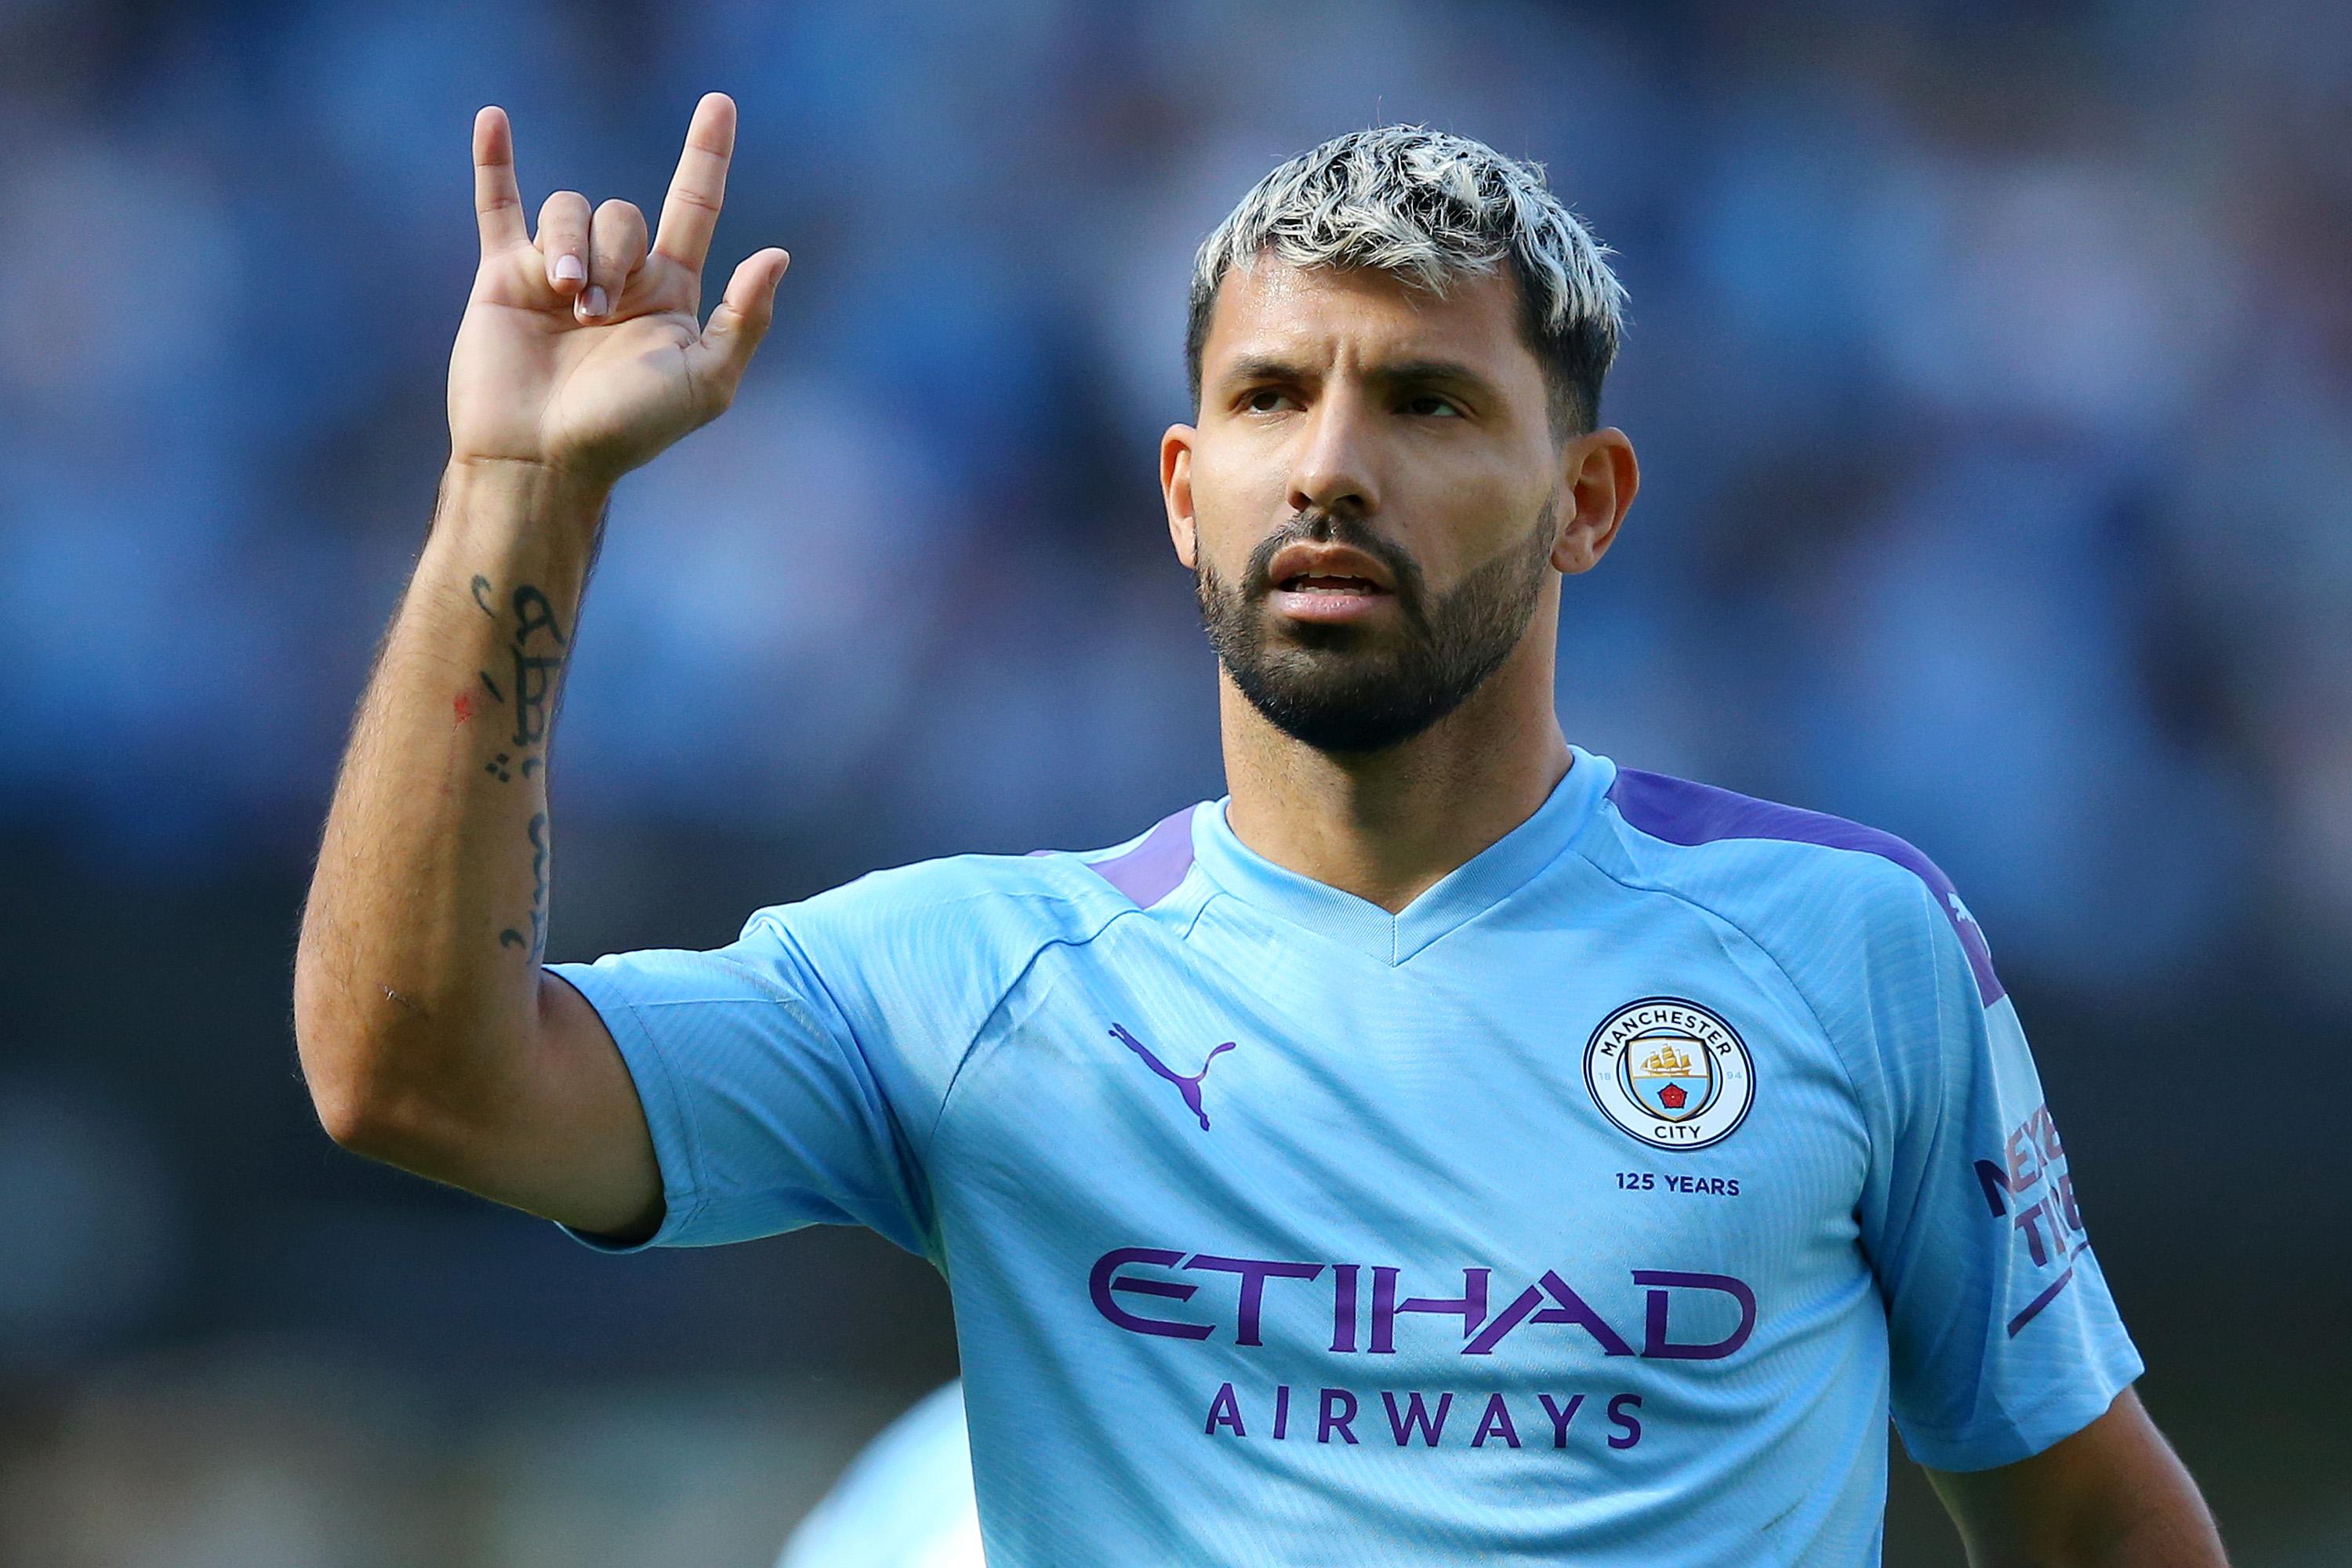 Sergio Aguero can be a great signing for Chelsea. (Image Credits: Official Premier League website/Twitter)